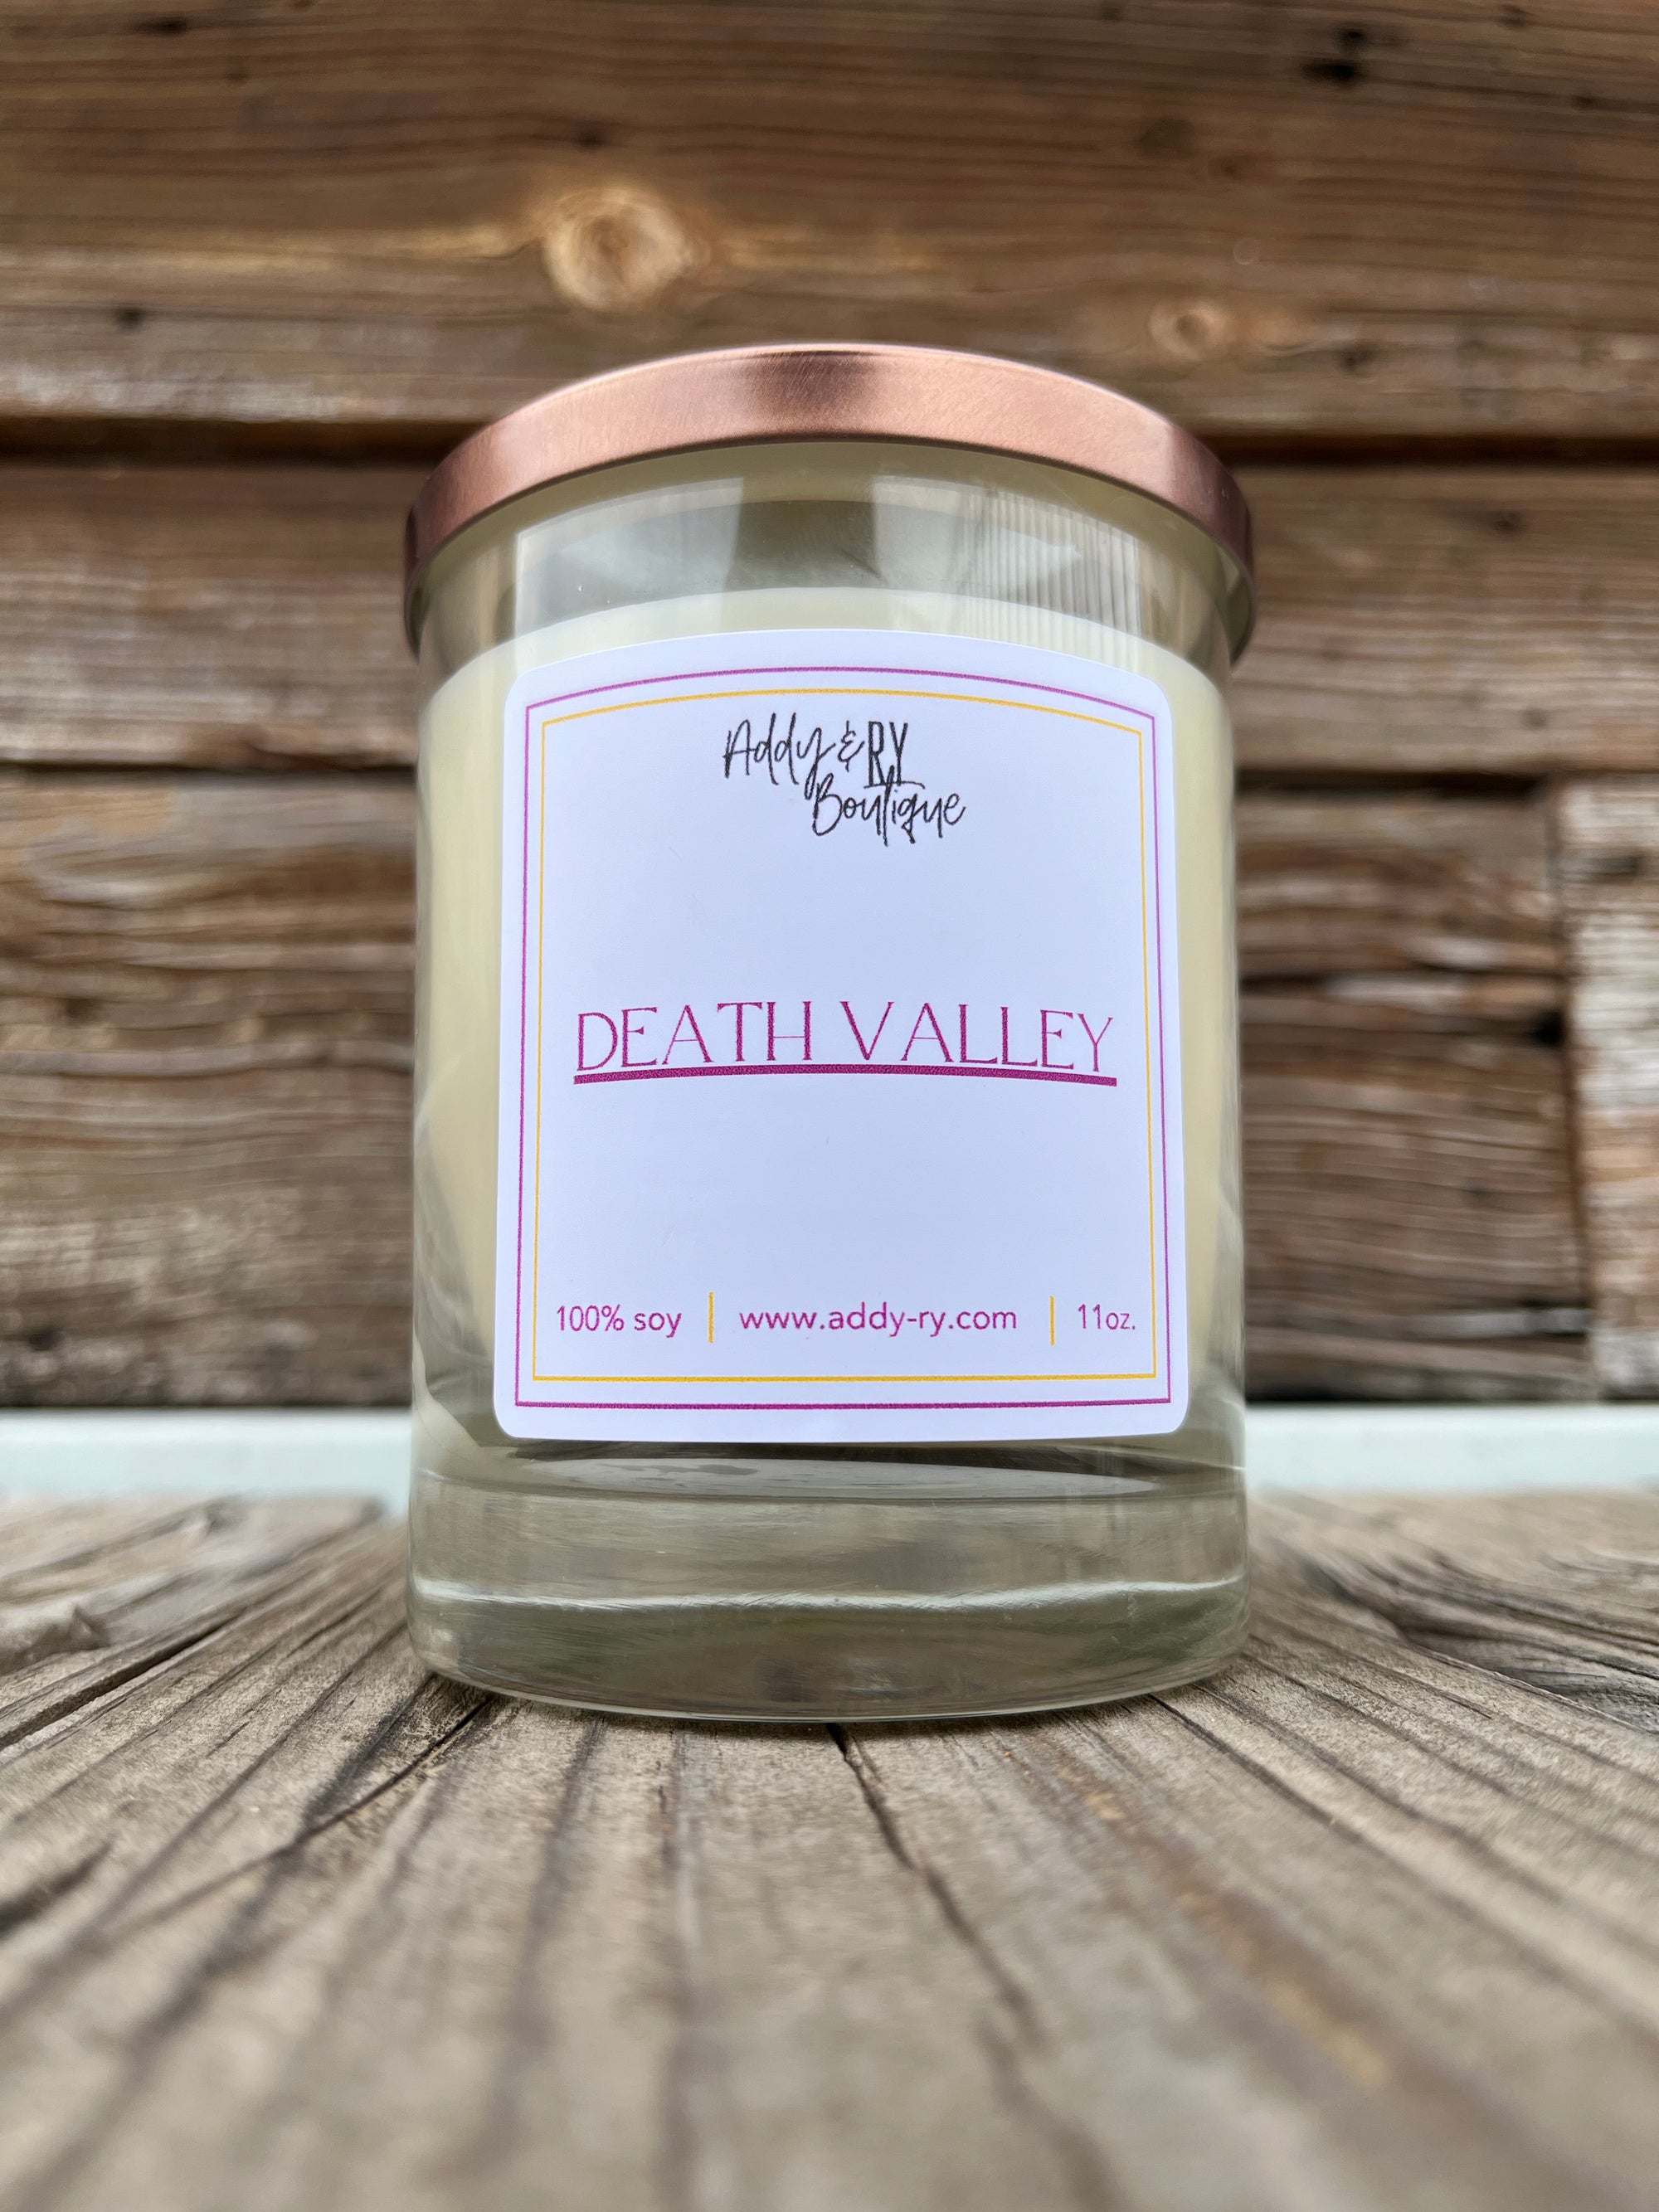 The Death Valley Candle